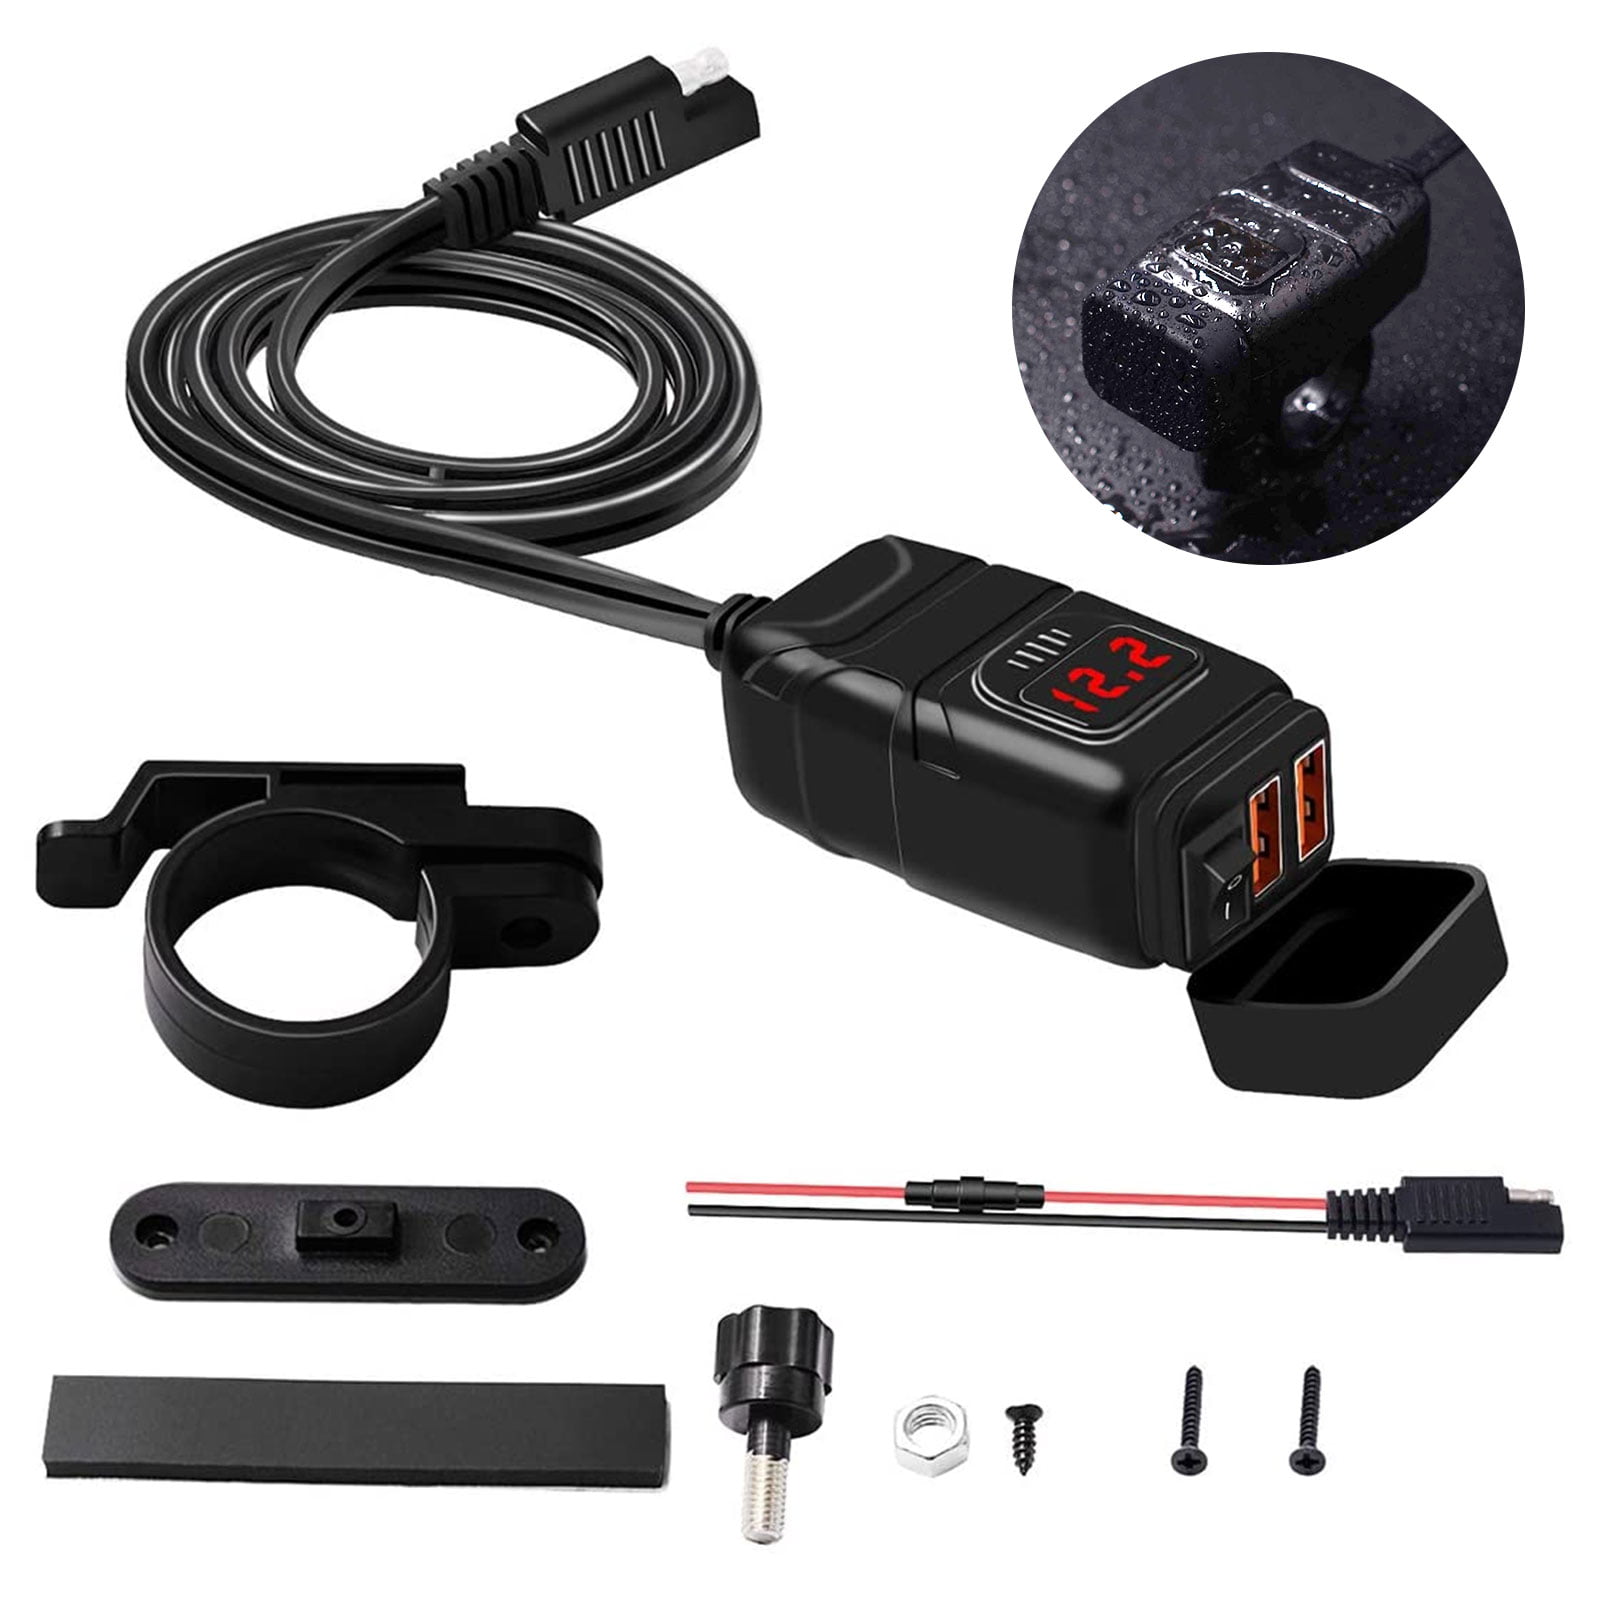  Motorcycle Power Adapter: Qidoe Waterproof Hella Din Plug to  USB Adapter with ON-Off Switch 30W USB C PD3.0 Din USB 18W QC3.0 Quick  Charge Aluminum Voltmeter Ducati Triumph BMW Motorcycle Accessories 